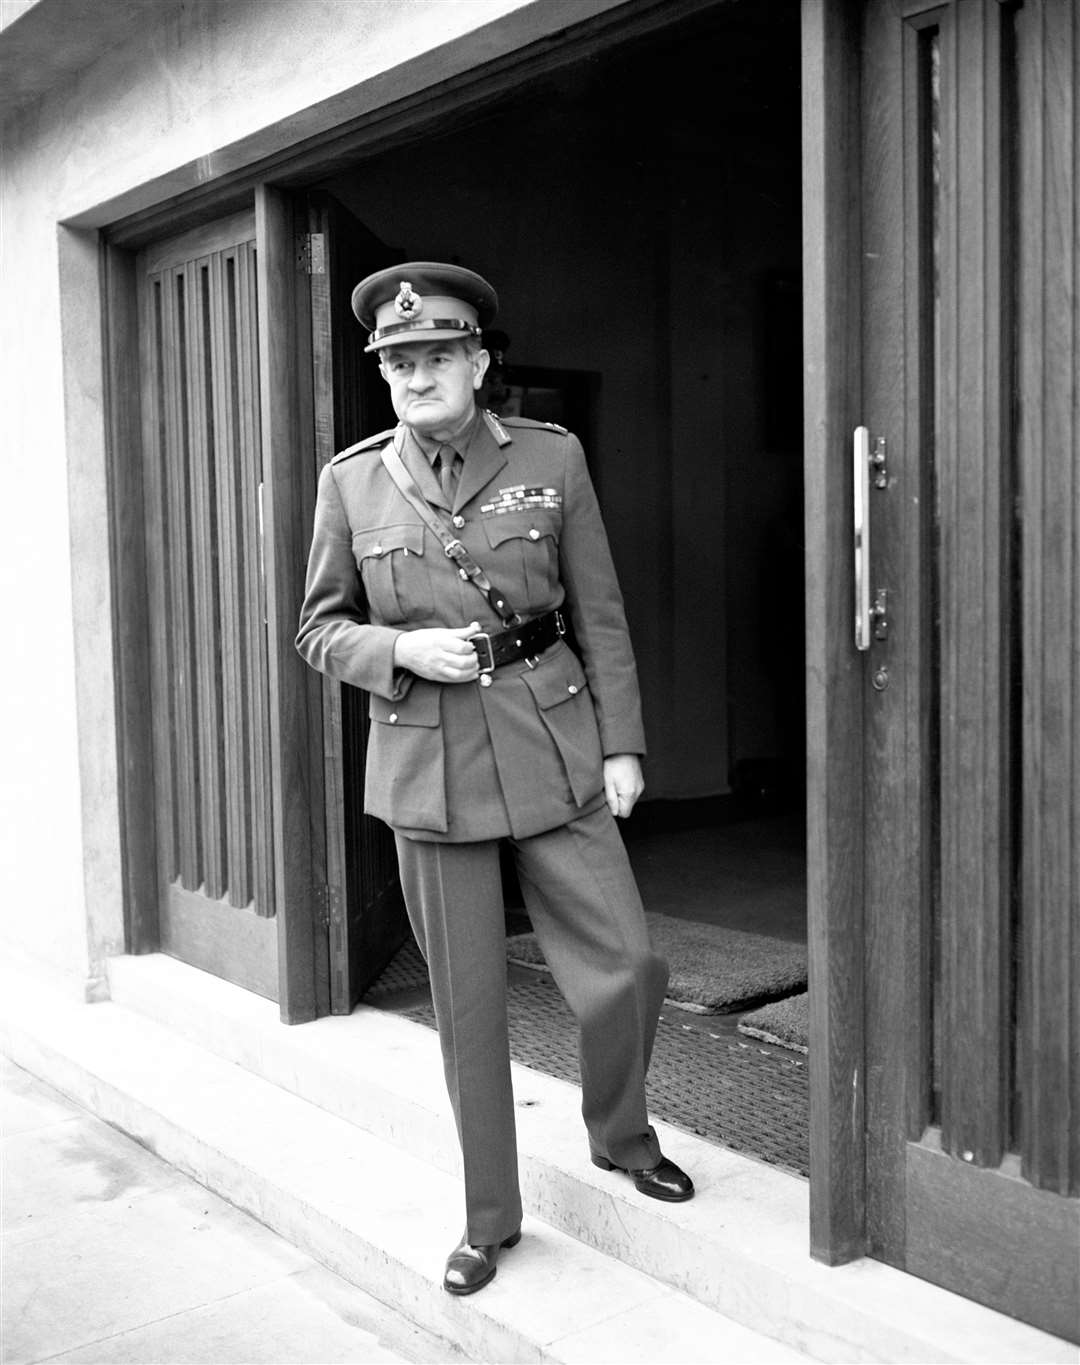 British military commander Sir William Slim was accused of molesting three different boys at Molong during his tenure as governor general of Australia in the 1950s (PA)